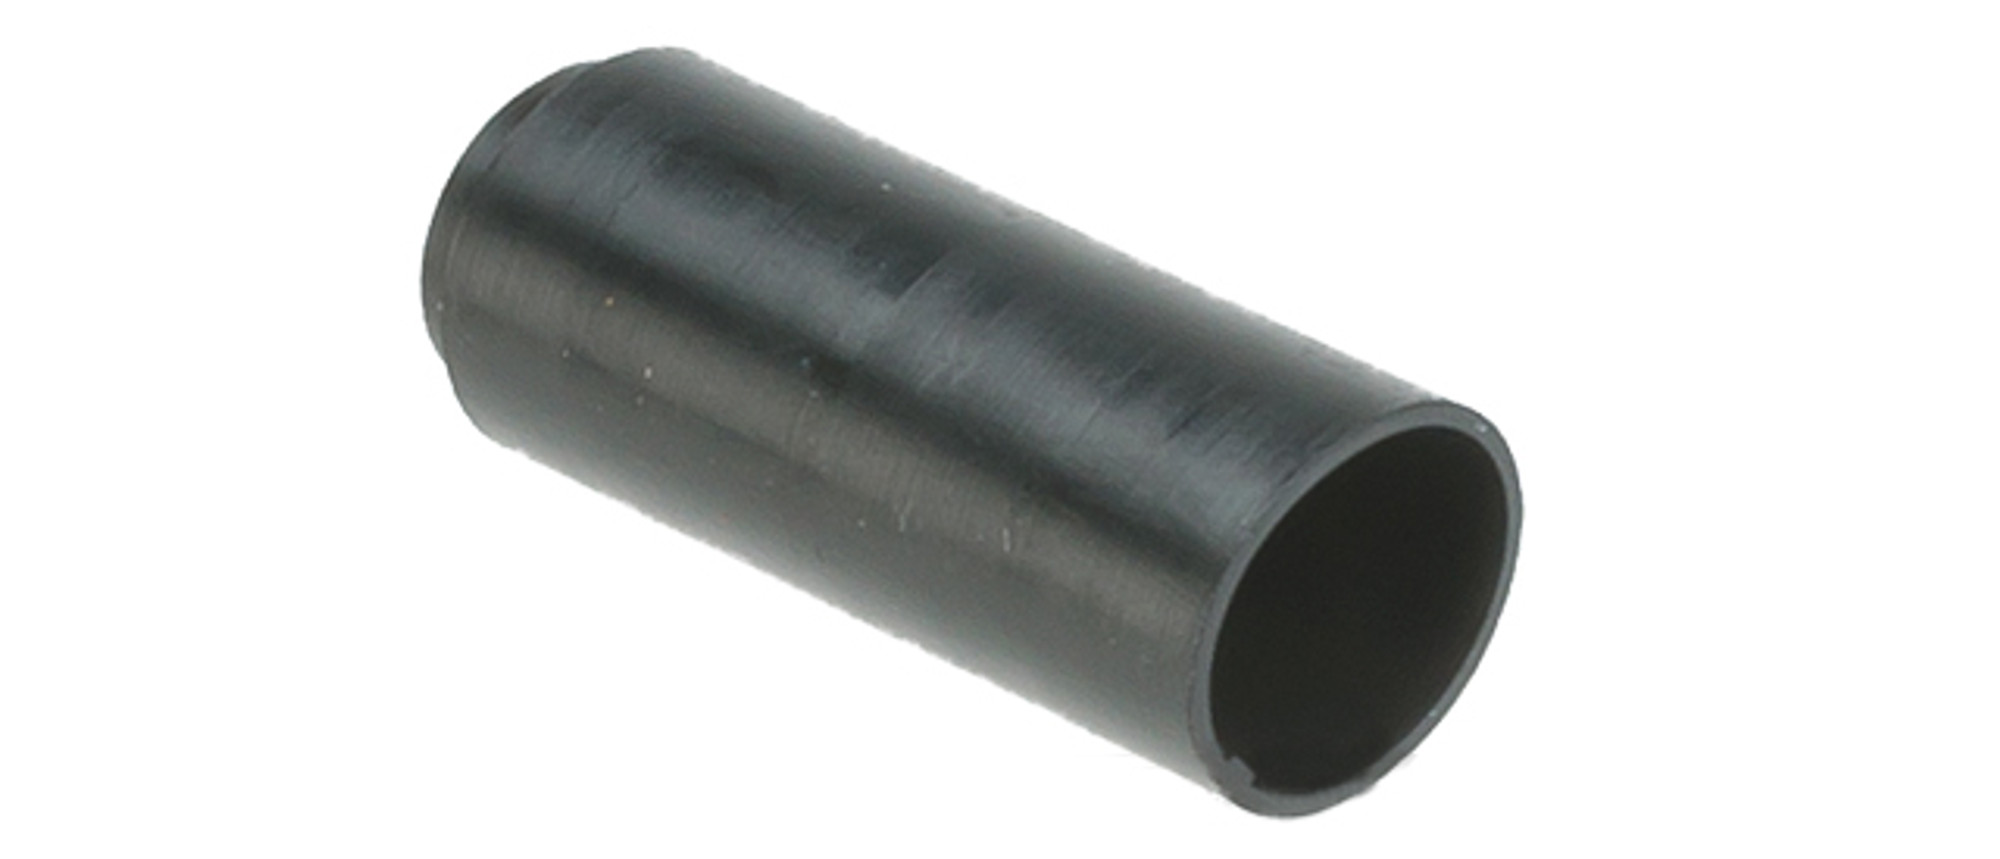 A-Plus Airsoft Performance 70 Degree Hopup Rubber Bucking for GHK Gas Blowback Series Rifle